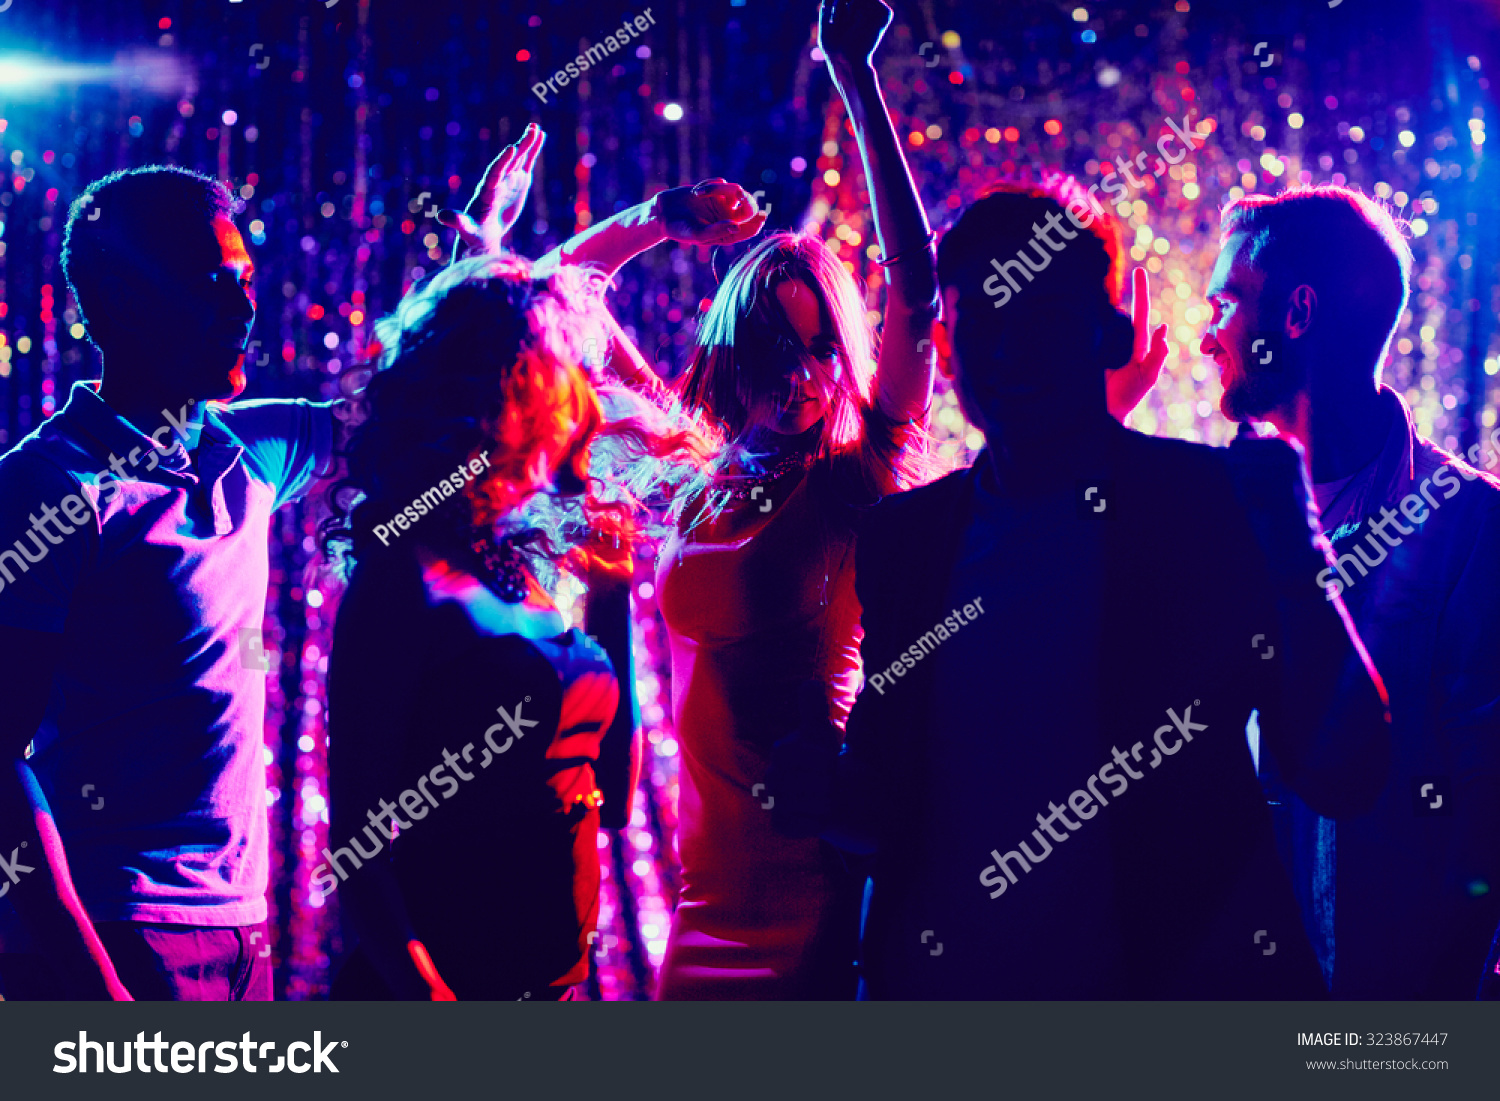 Group of guys and girls dancing in the night club #323867447